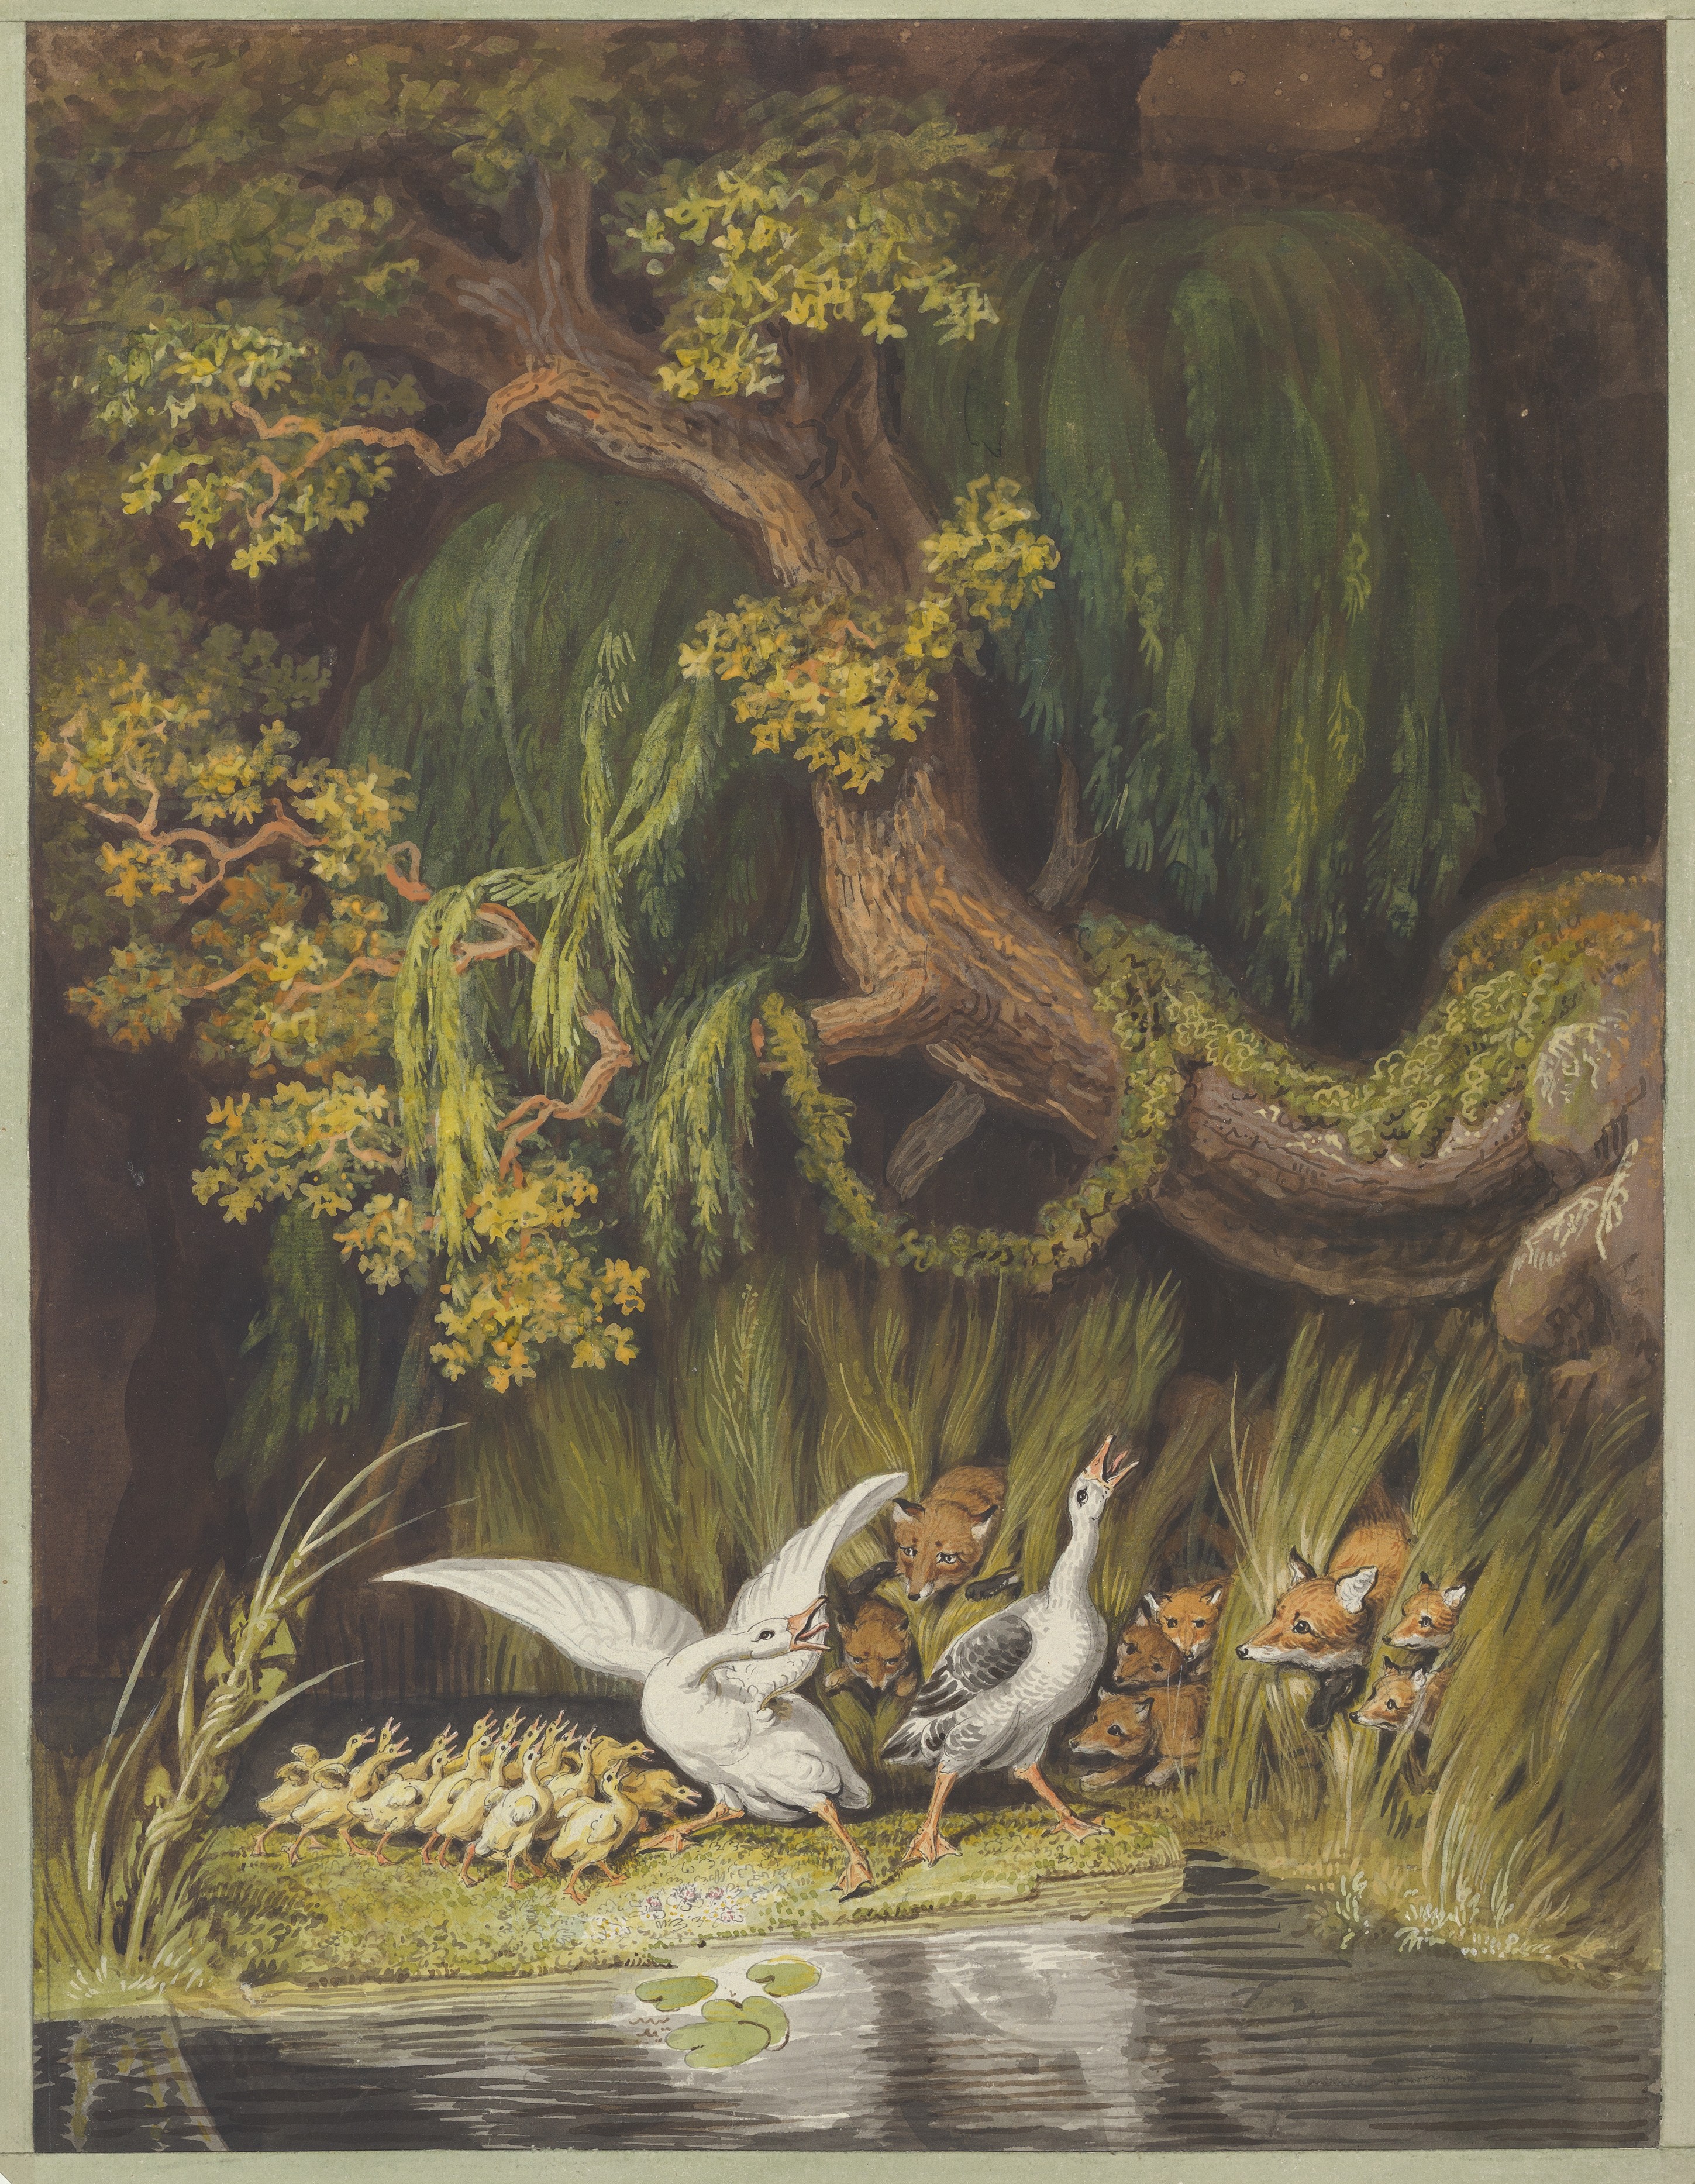 Johann Heinrich Wilhelm Rushes | Museum Foxes the a Metropolitan Tischbein Goose Alarm Goslings | Gander Art in as and A Emerge Honking Cubs their The from with with of Two their